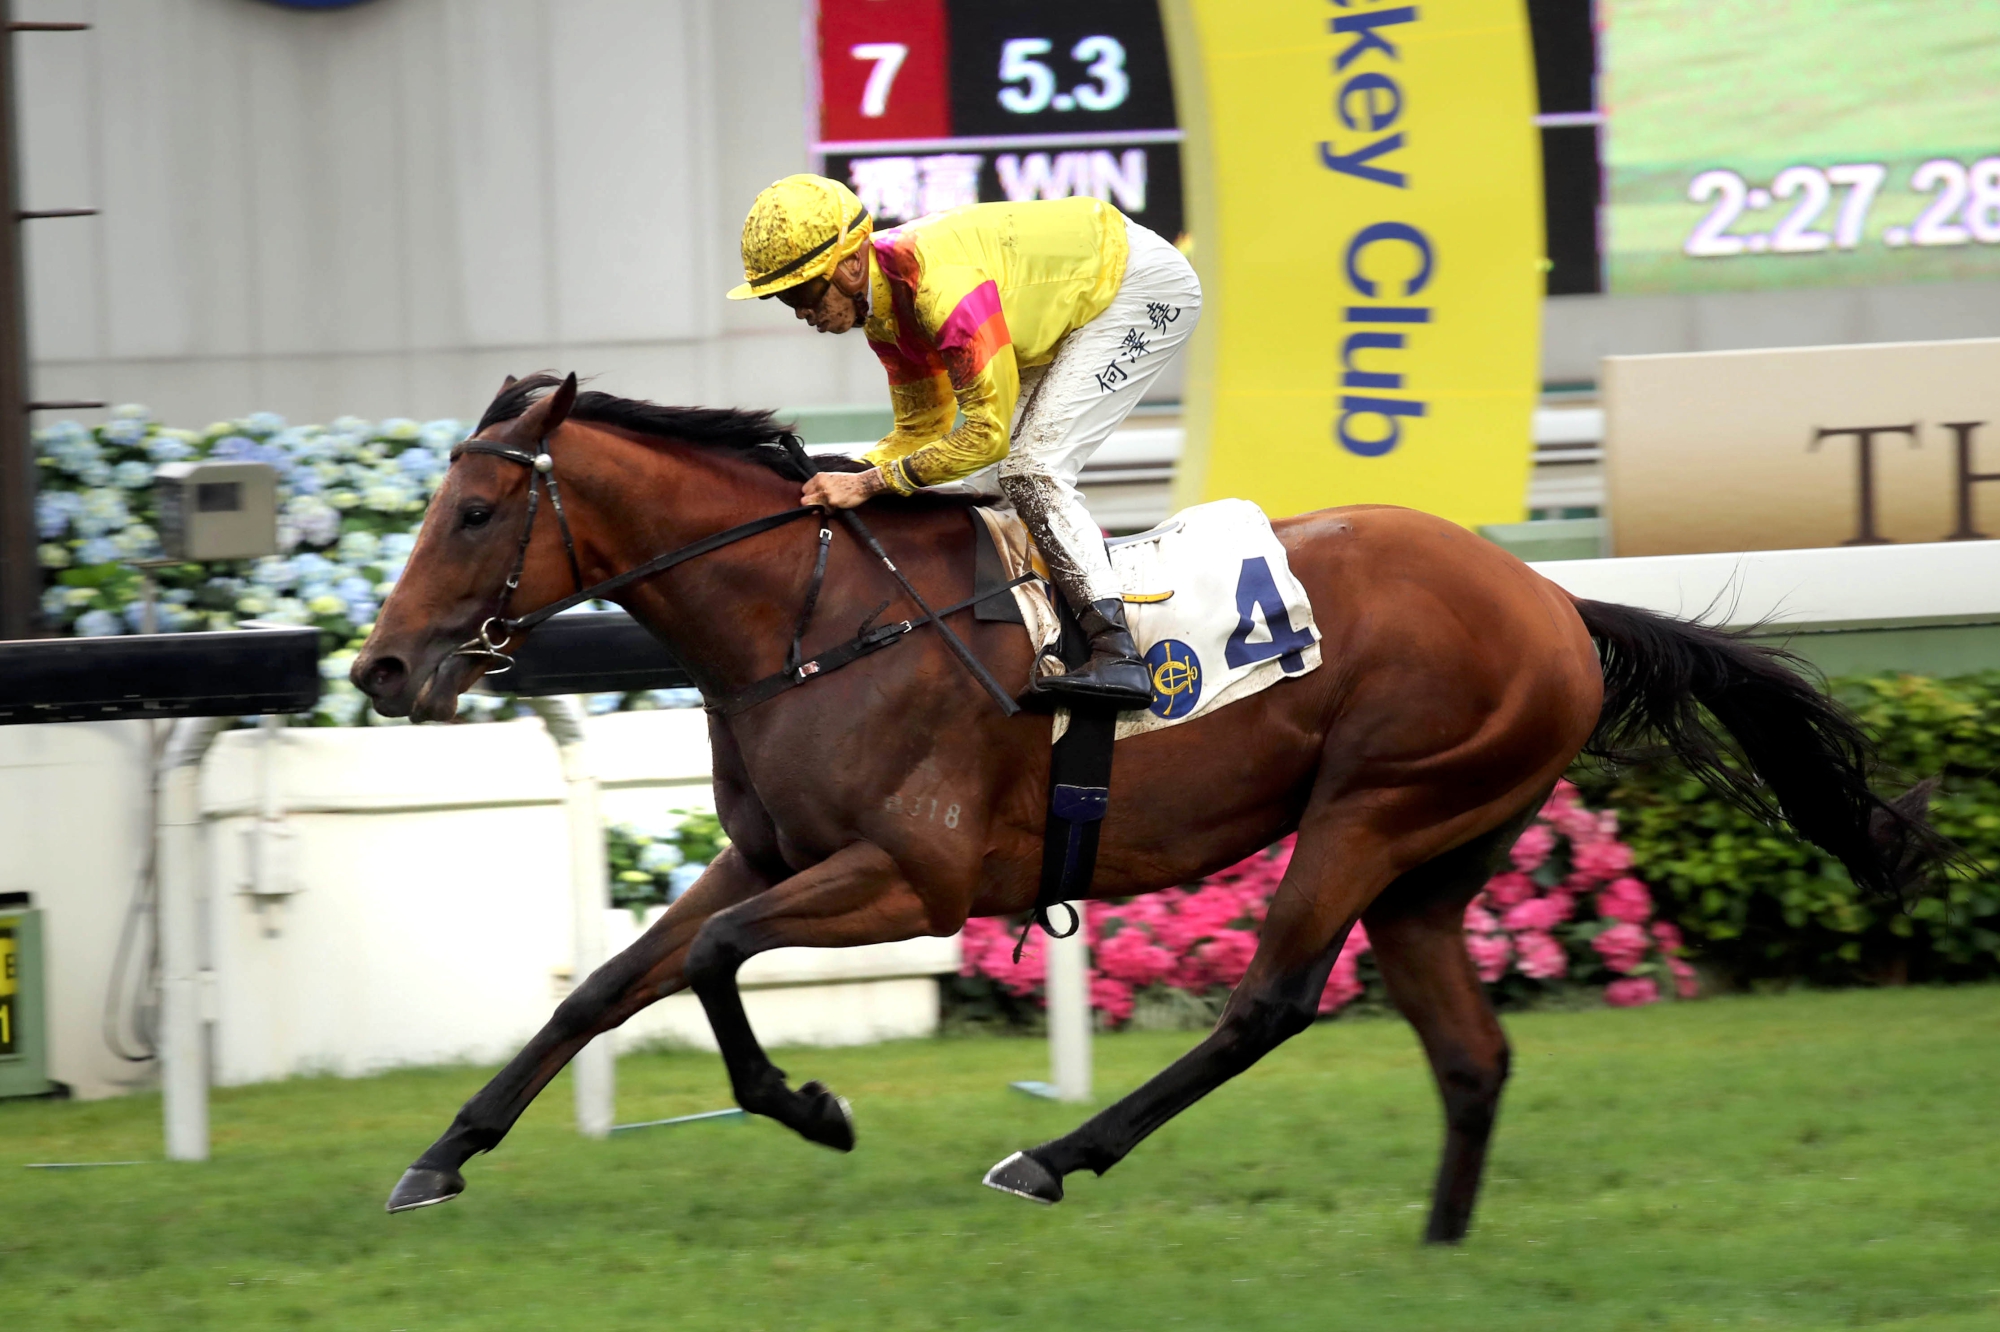 Ho Ho Khan – HK : Fair stayer with four HK wins to his name including G3 Queen Mother Memorial Cup in 2019.